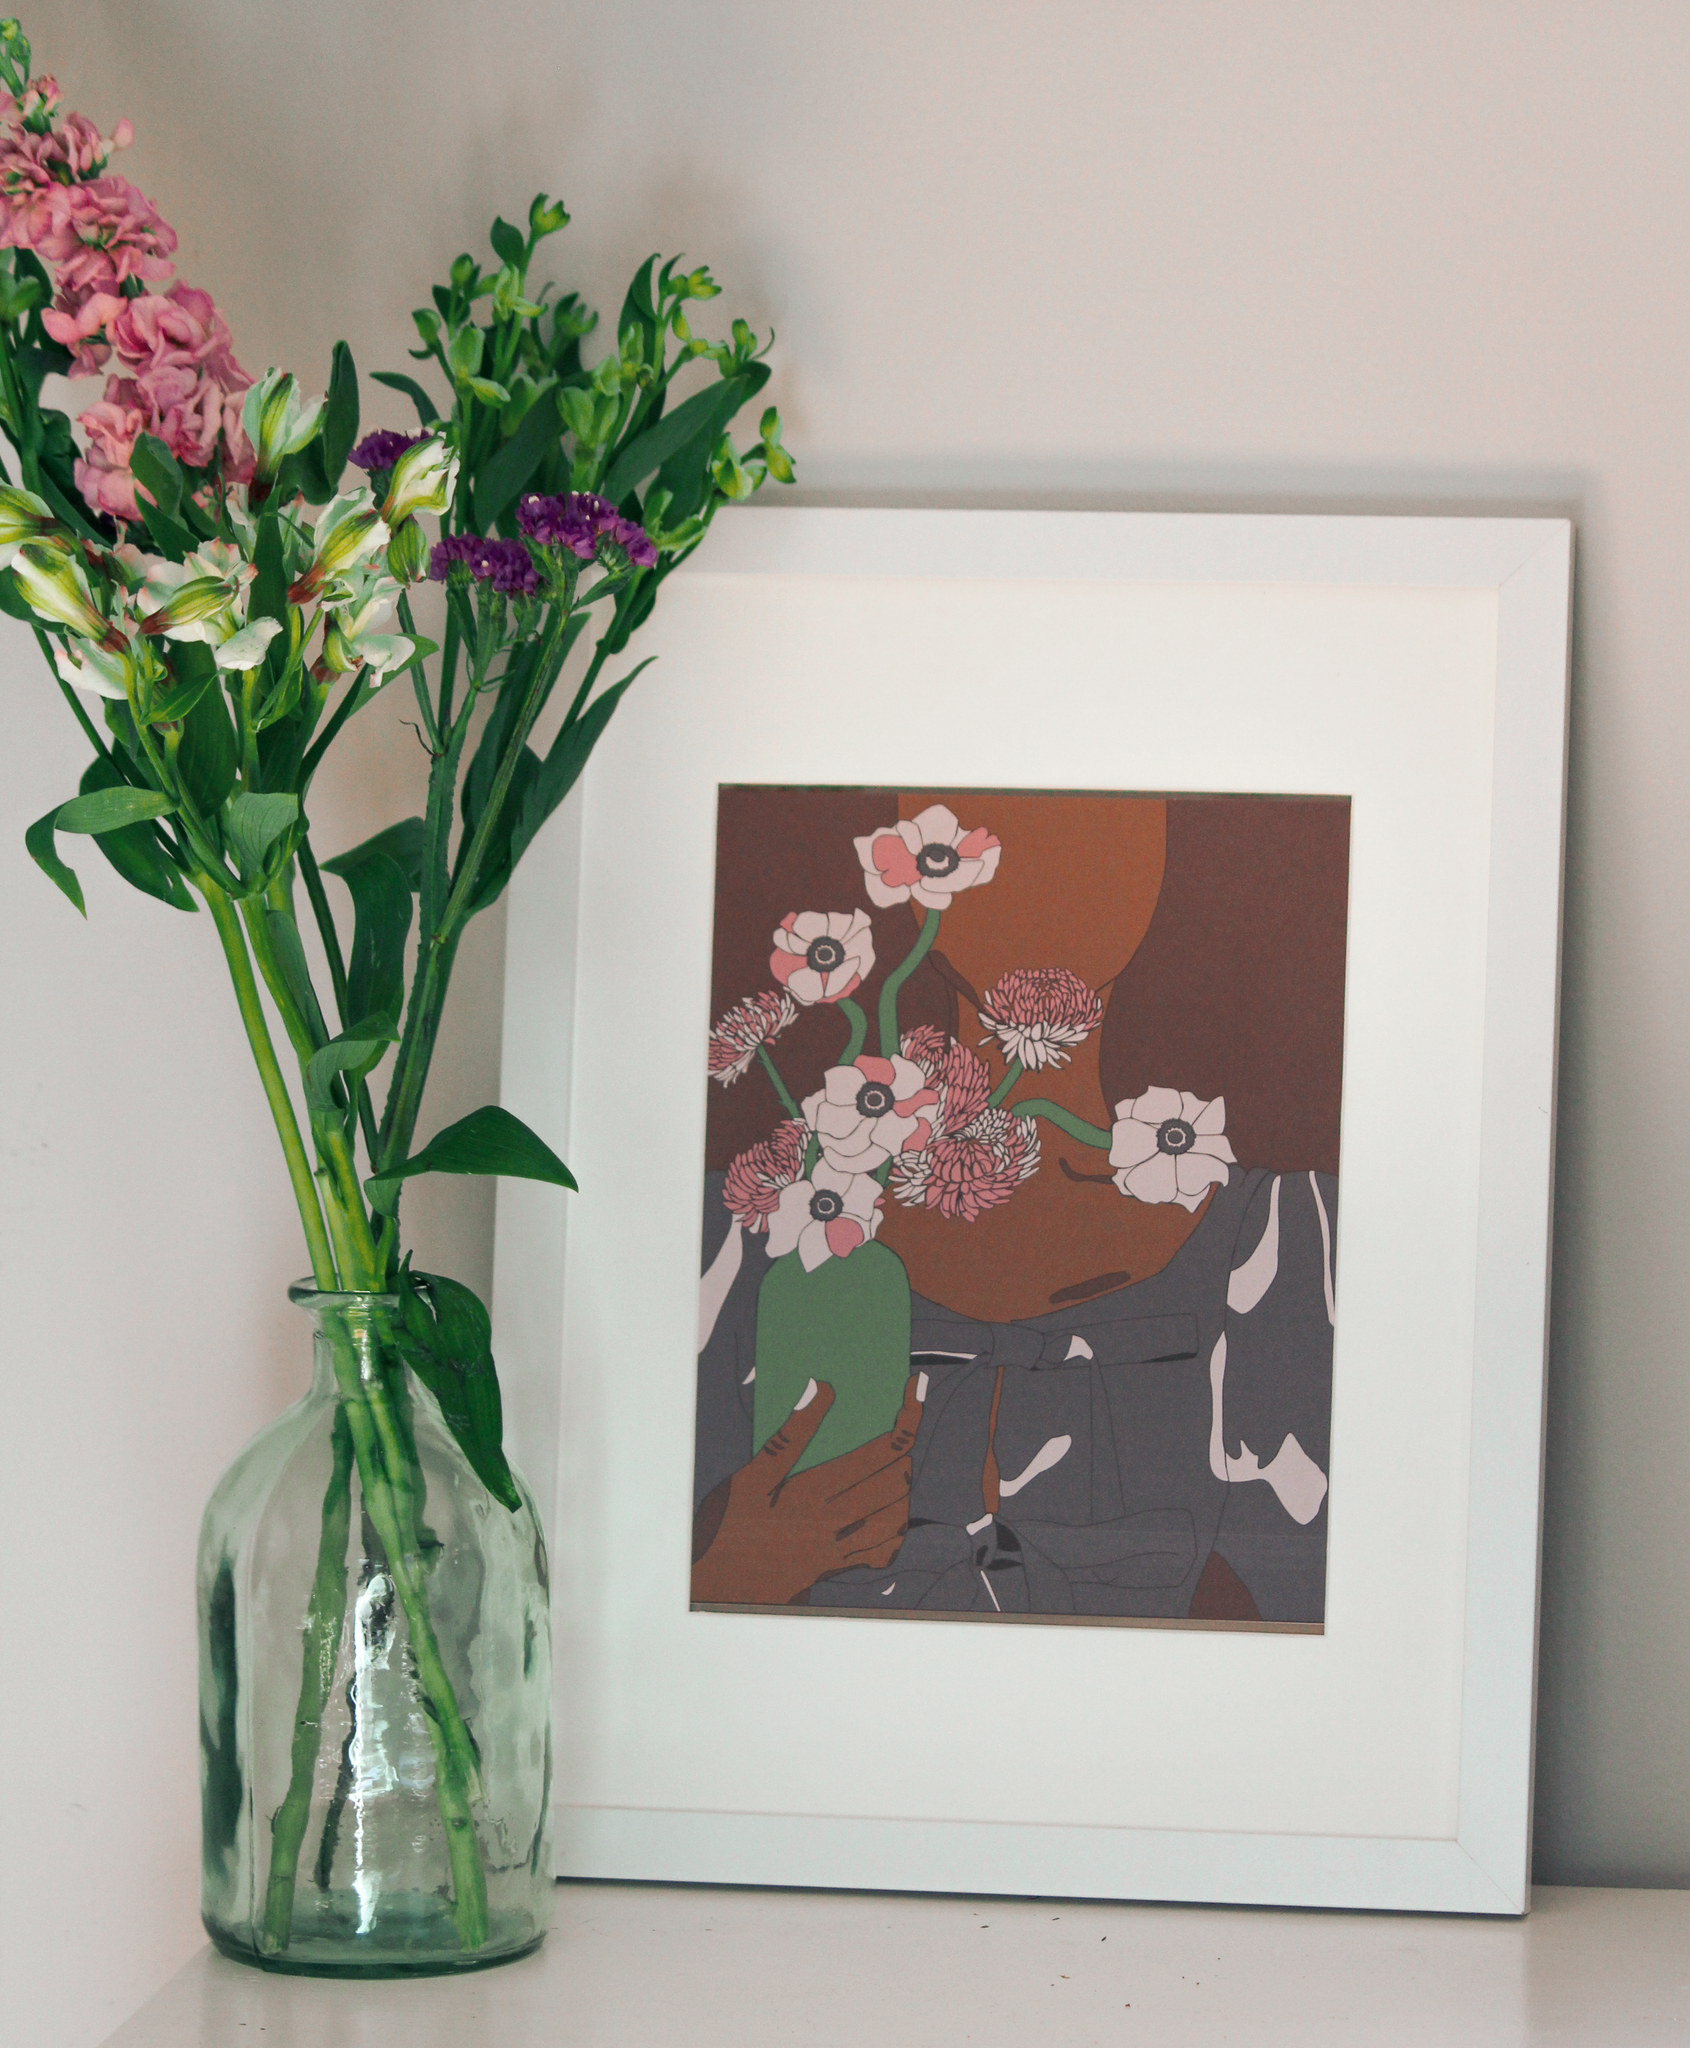 A graphic illustration of a Black woman in a black top holding a green vase of pink flowers, with a brown background, inside of a white frame standing up on a table next to a vase of garden flowers